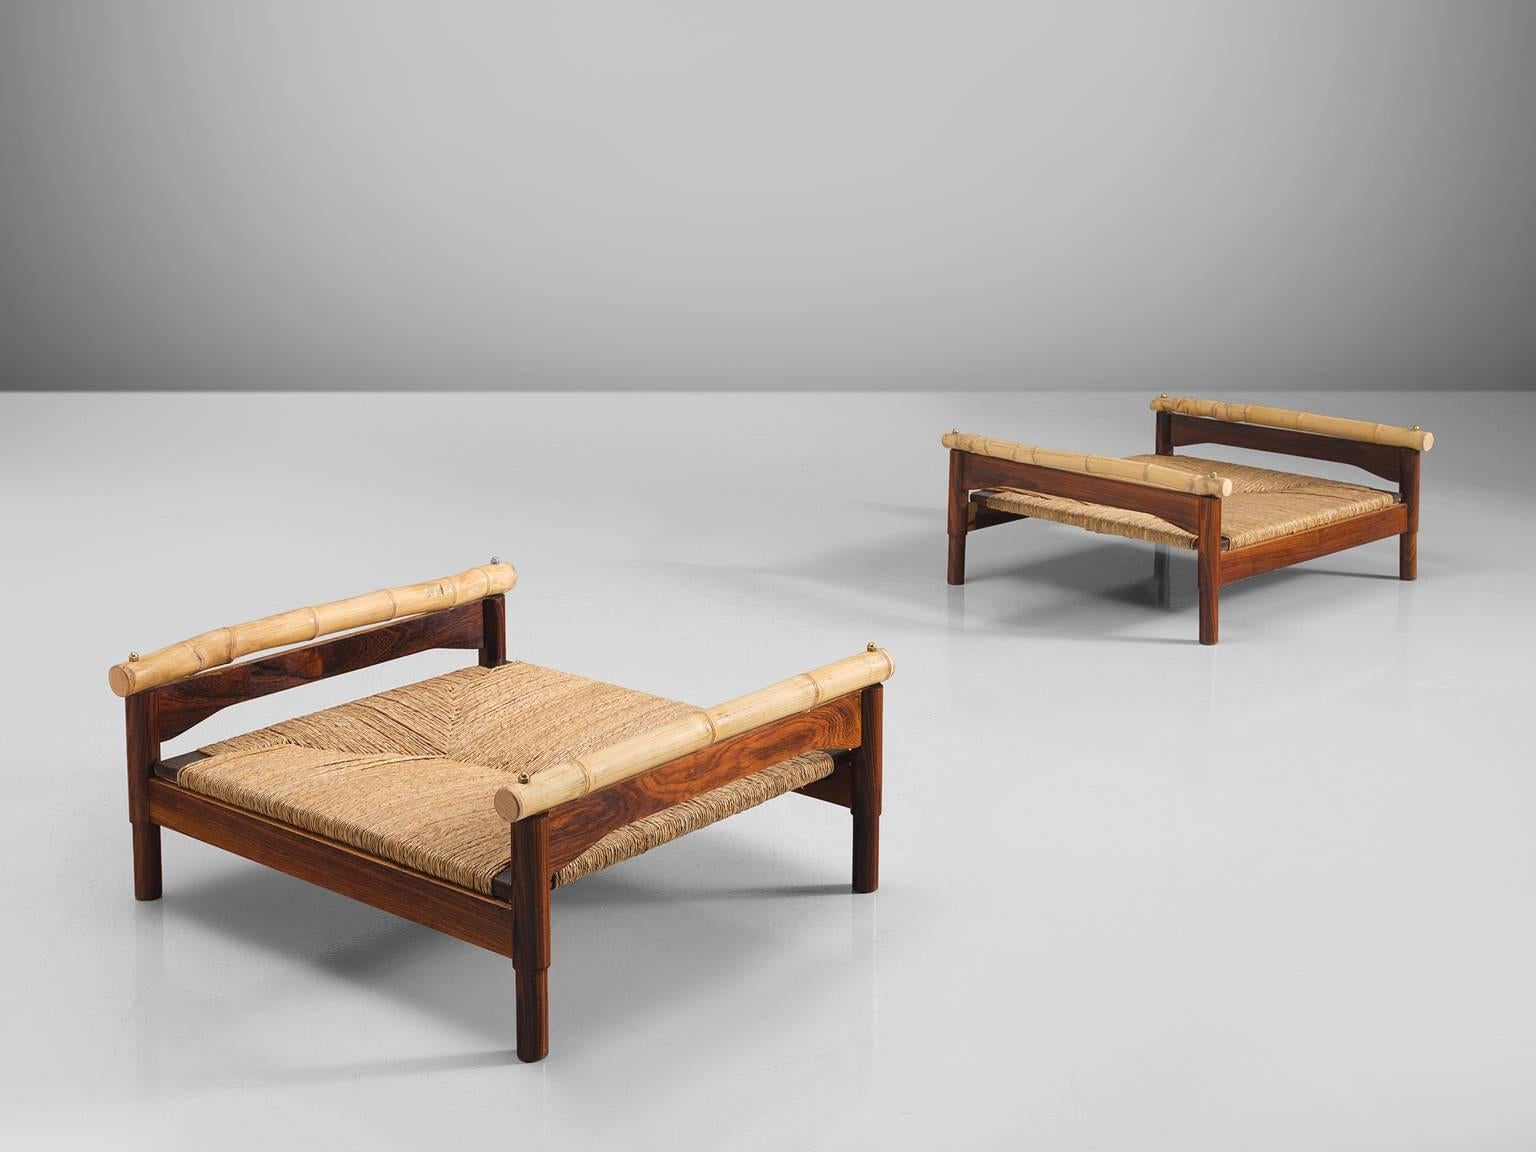 Benches or stools, rosewood, cane, bamboo, Italy, 1960s.

These midcentury stools are made of rosewood, cane and bamboo are very sculptural and robust. Their design is as such that it is very low to the ground. The materials are warm and natural